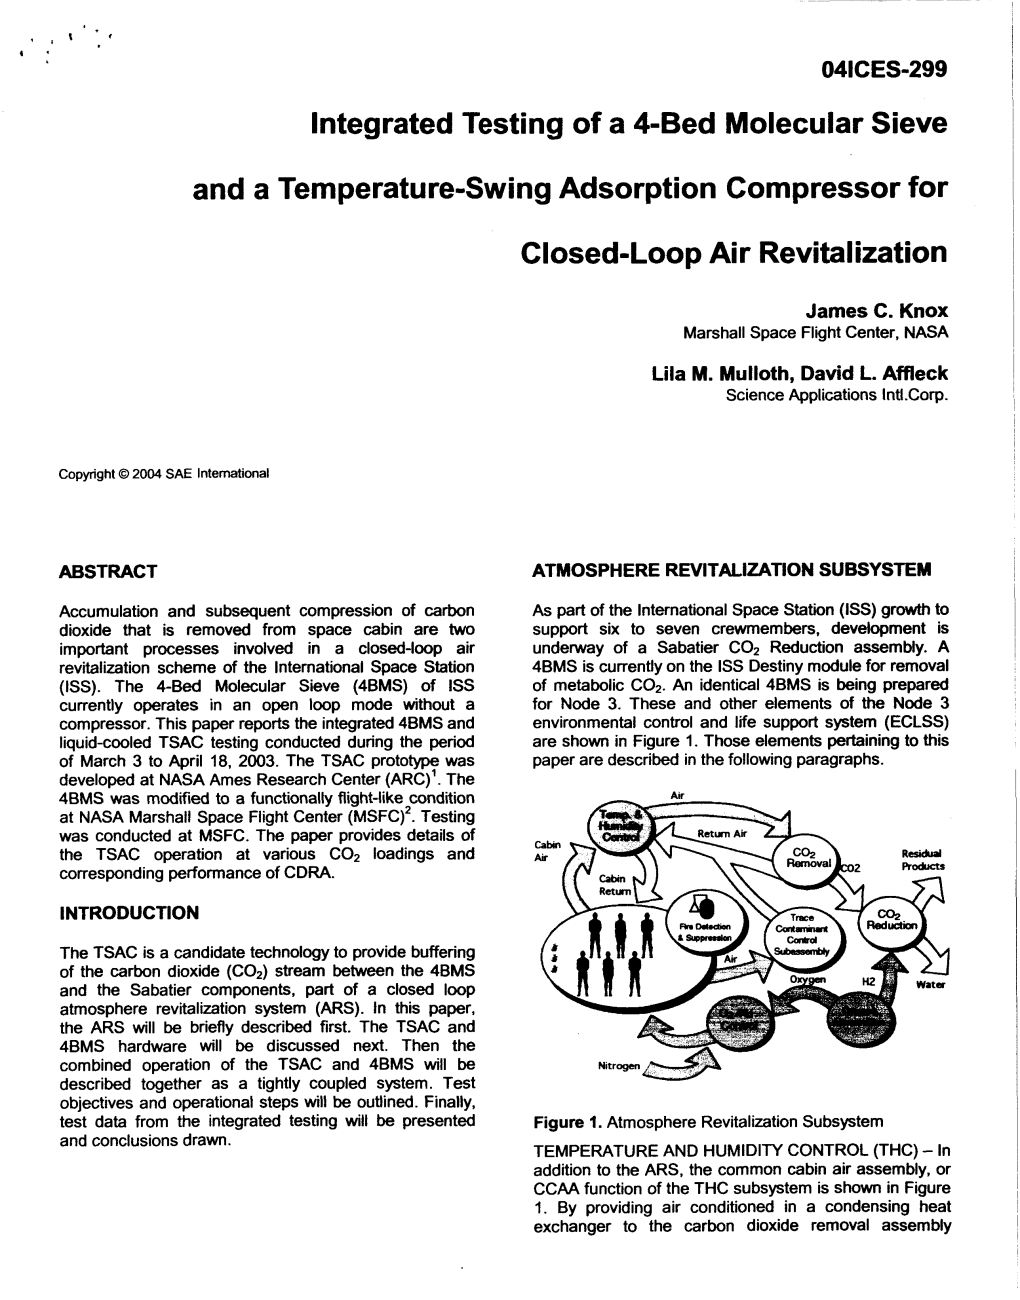 Integrated Testing of a 4-Bed Molecular Sieve and a Temperature-Swing Adsorption Compressor for Closed-Loop Air Revitalization